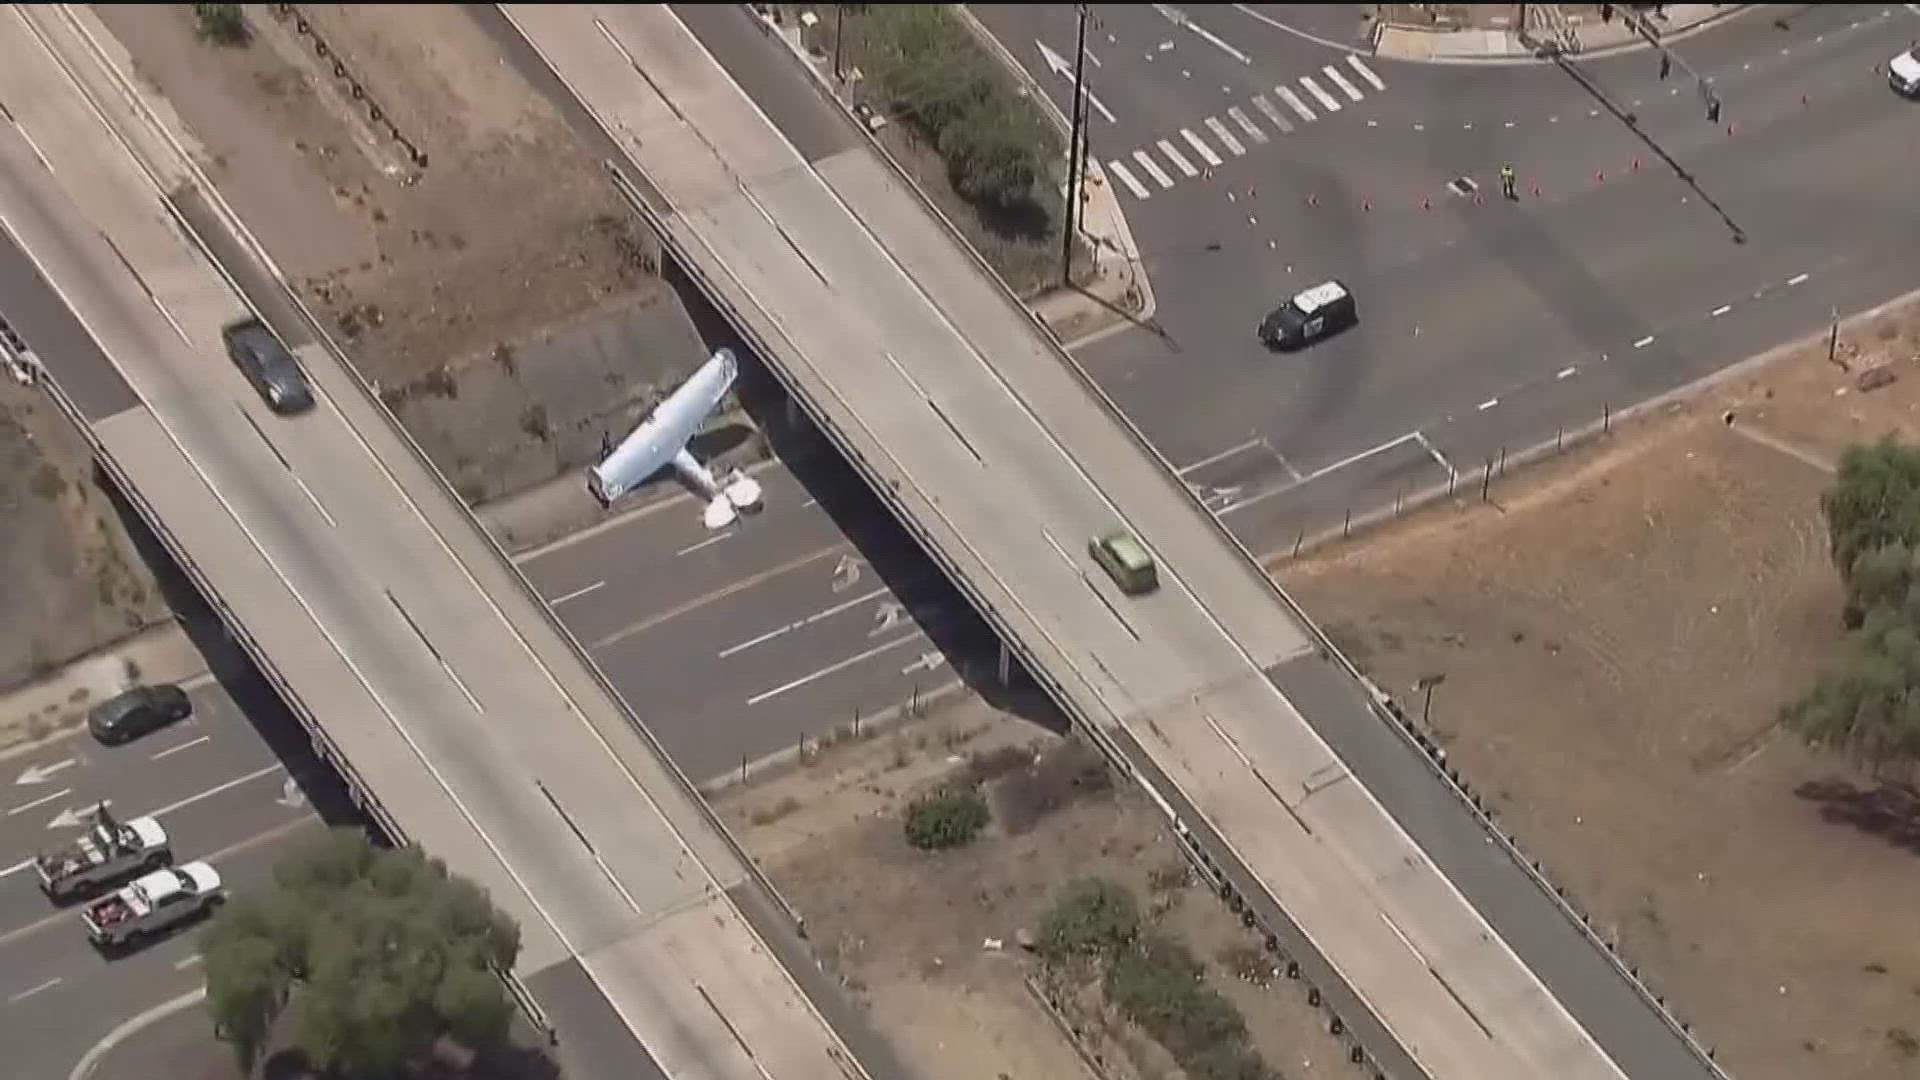 Greenfield Drive has been closed due to that plane crash near Interstate 8 east of Gillespie Field, but no freeway lanes are impacted, according to El Cajon police.